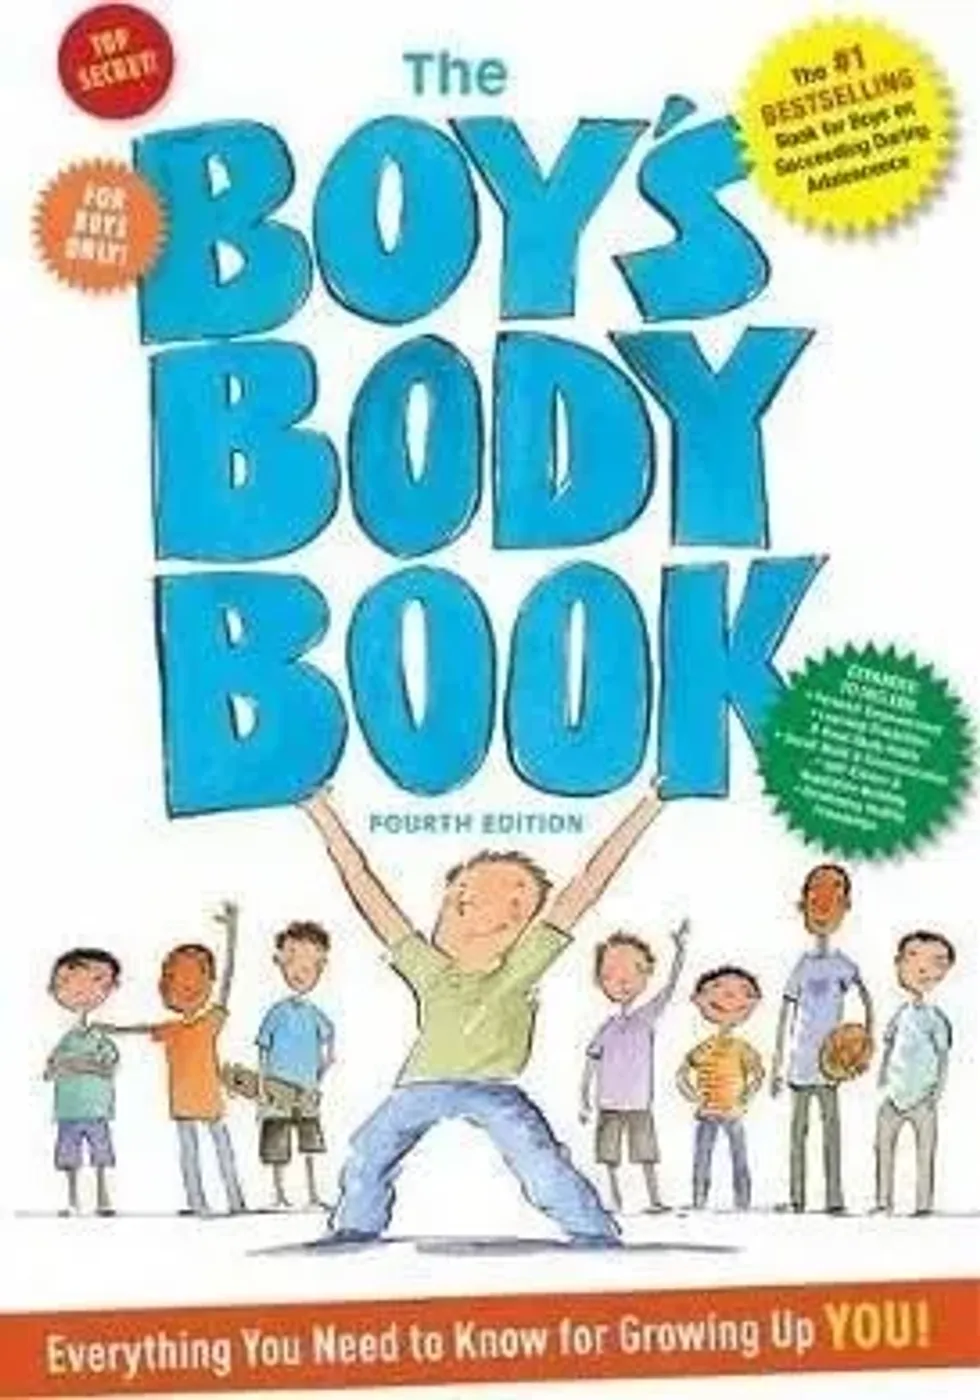 The Boys Body Book, Fourth Edition: Everything You Need to Know for Growing Up YOU! By Kelli Dunham.